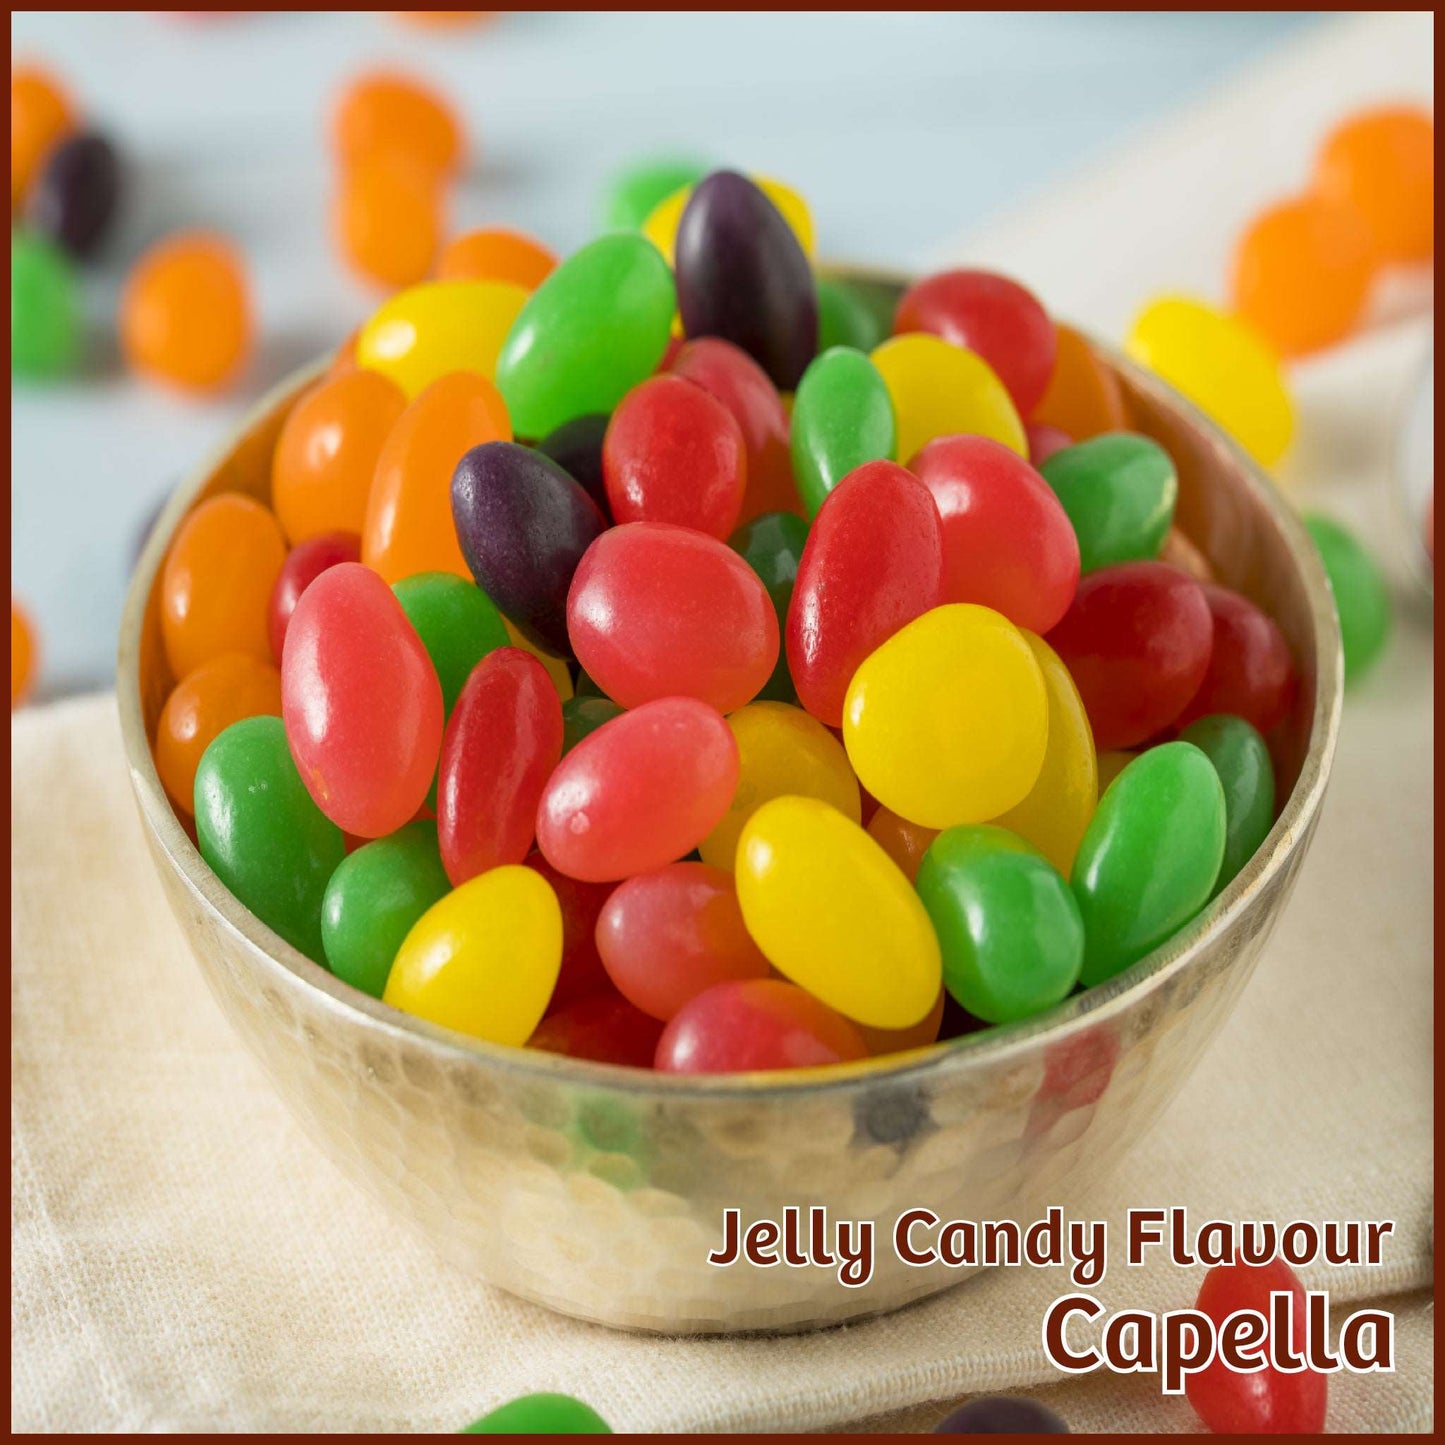 Jelly Candy Flavour - Capella - Flavour Fog - Canada's flavour depot.